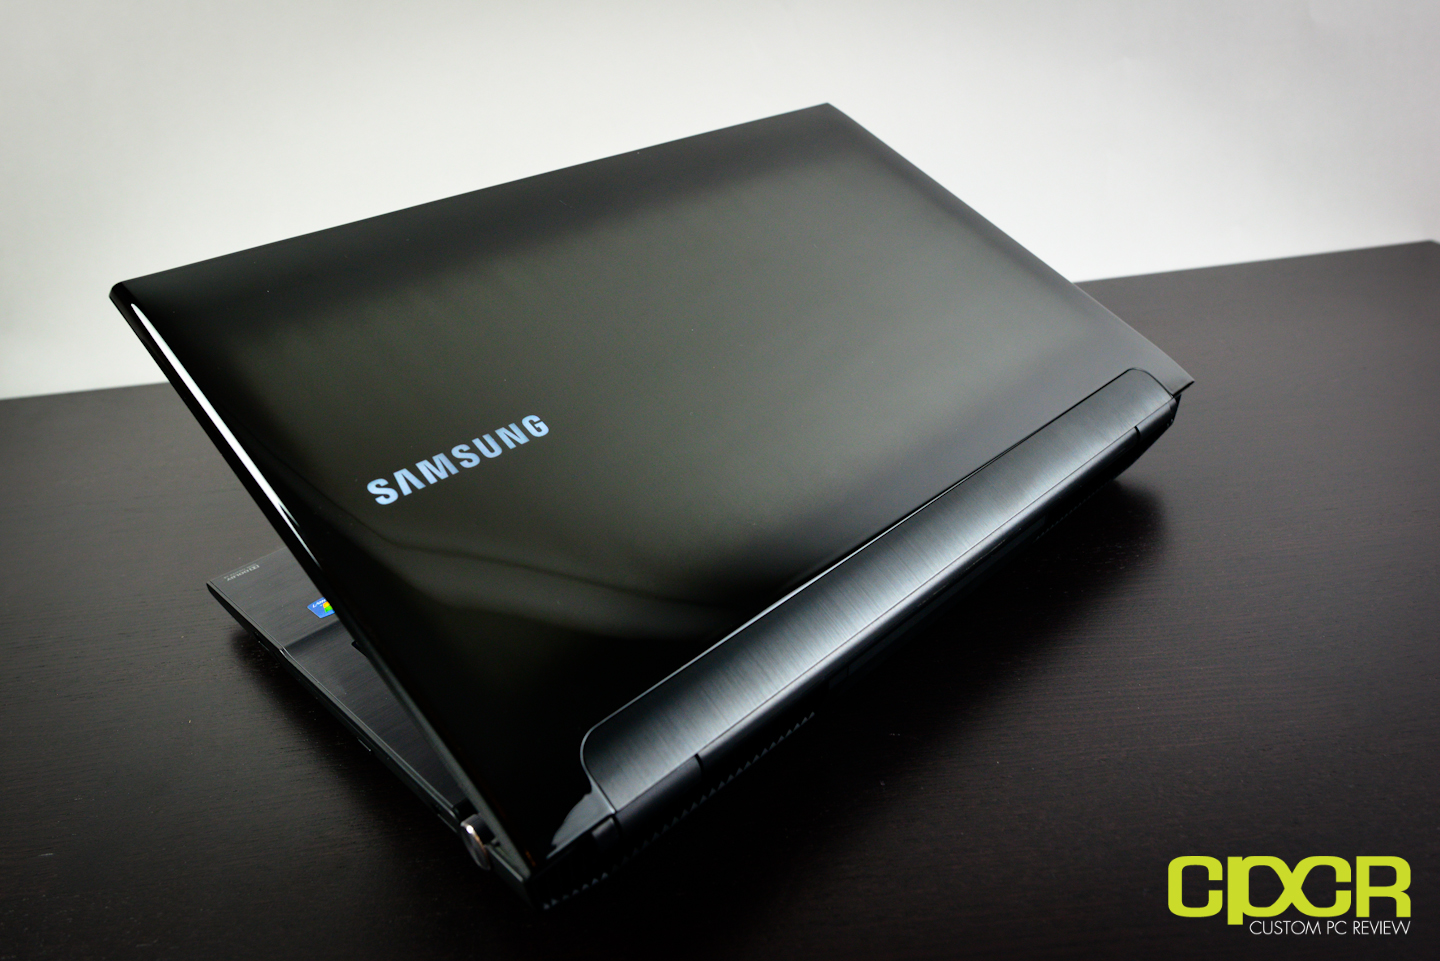 Samsung Series 7 Gamer (NP700G7C-S01) Gaming Notebook Review